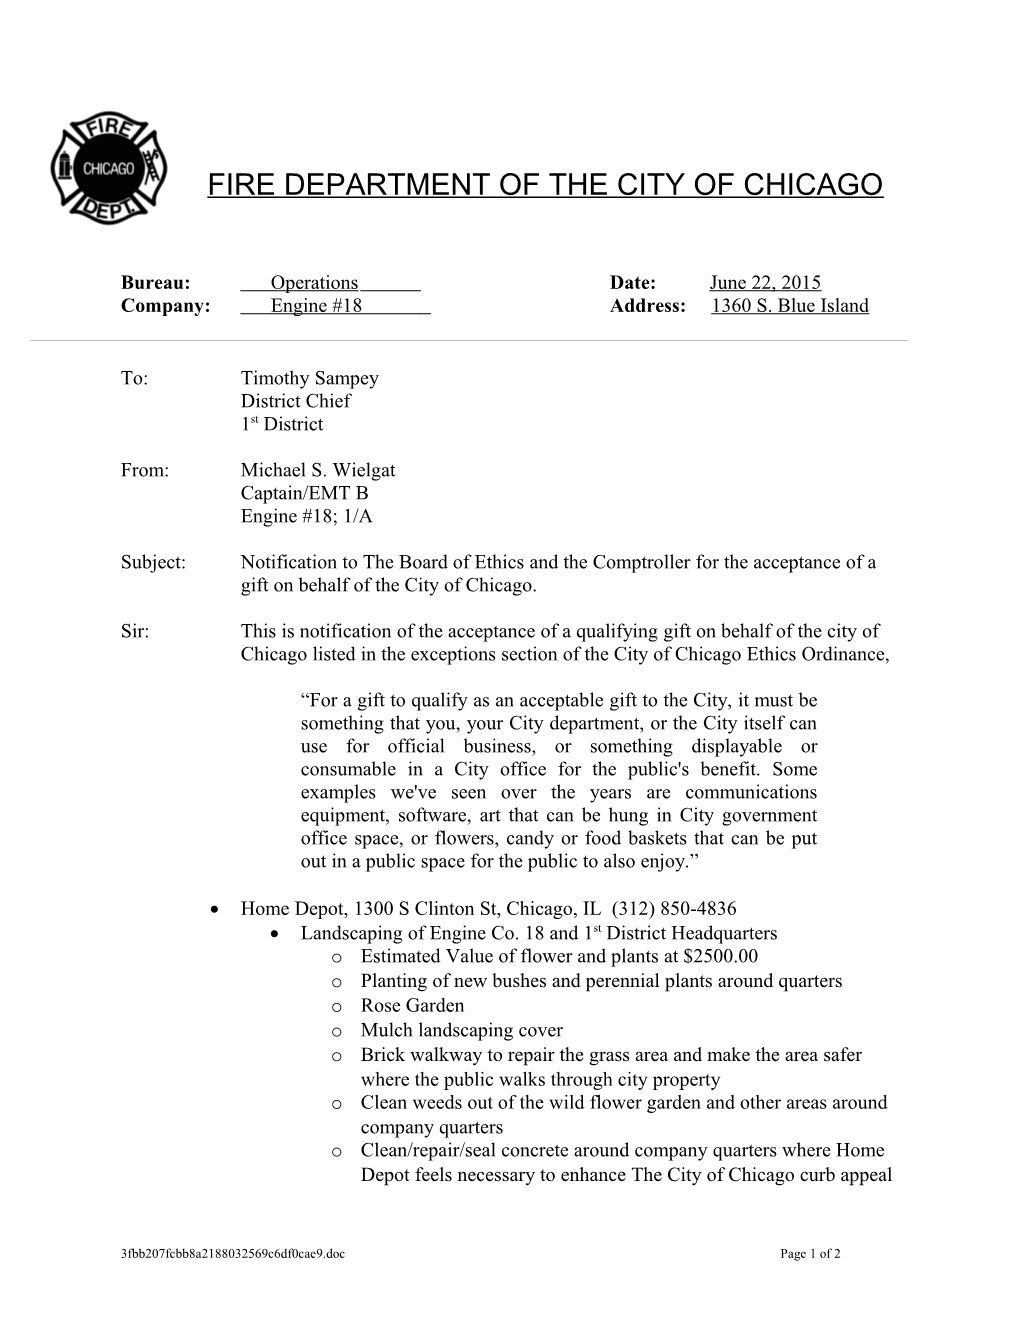 Fire Department of the City of Chicago